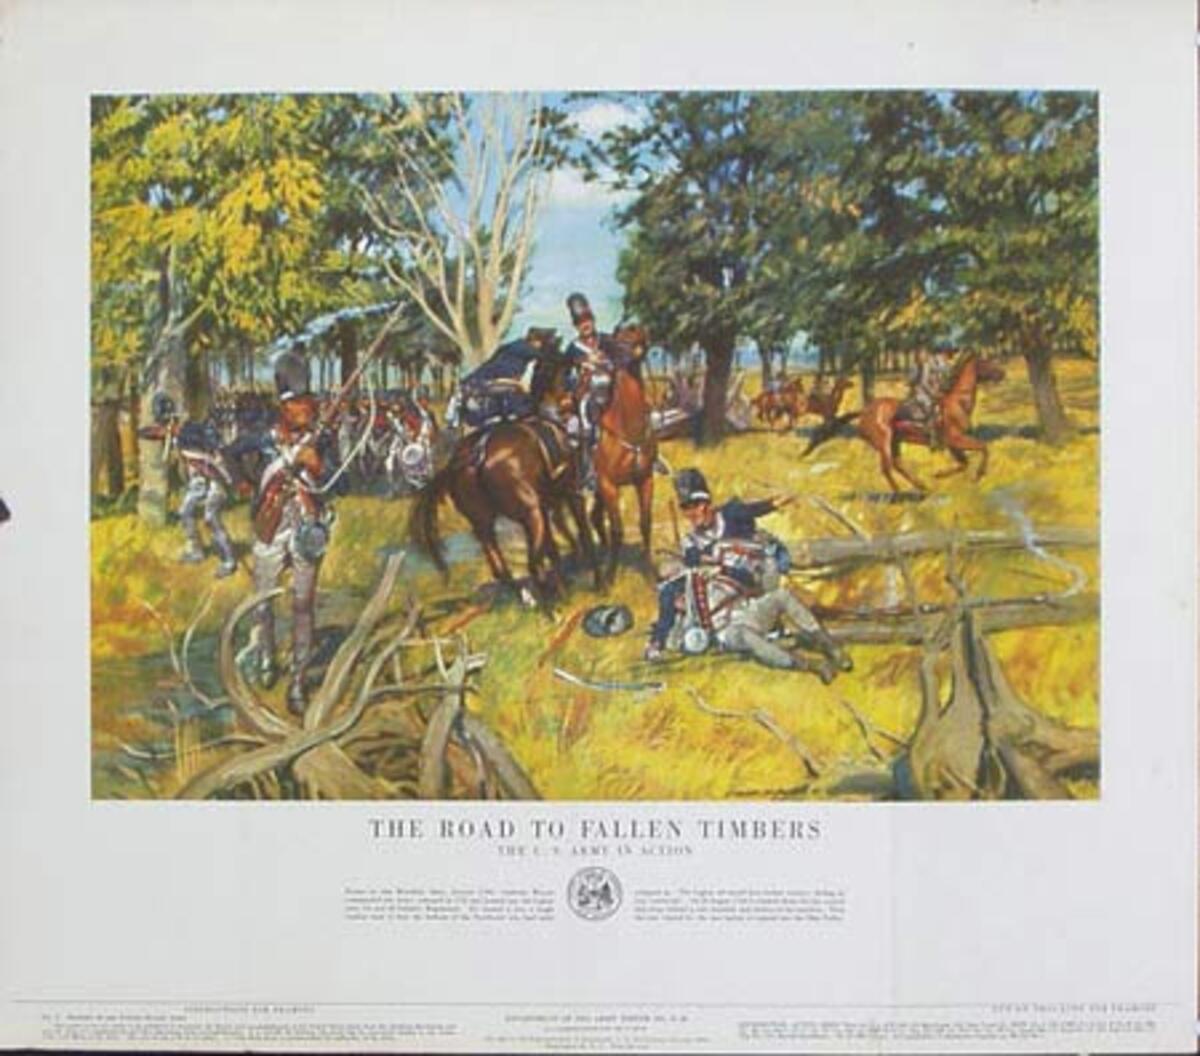 The Road to Fallen Timbers U.S. Army in Action Original Vintage Army Propaganda Poster